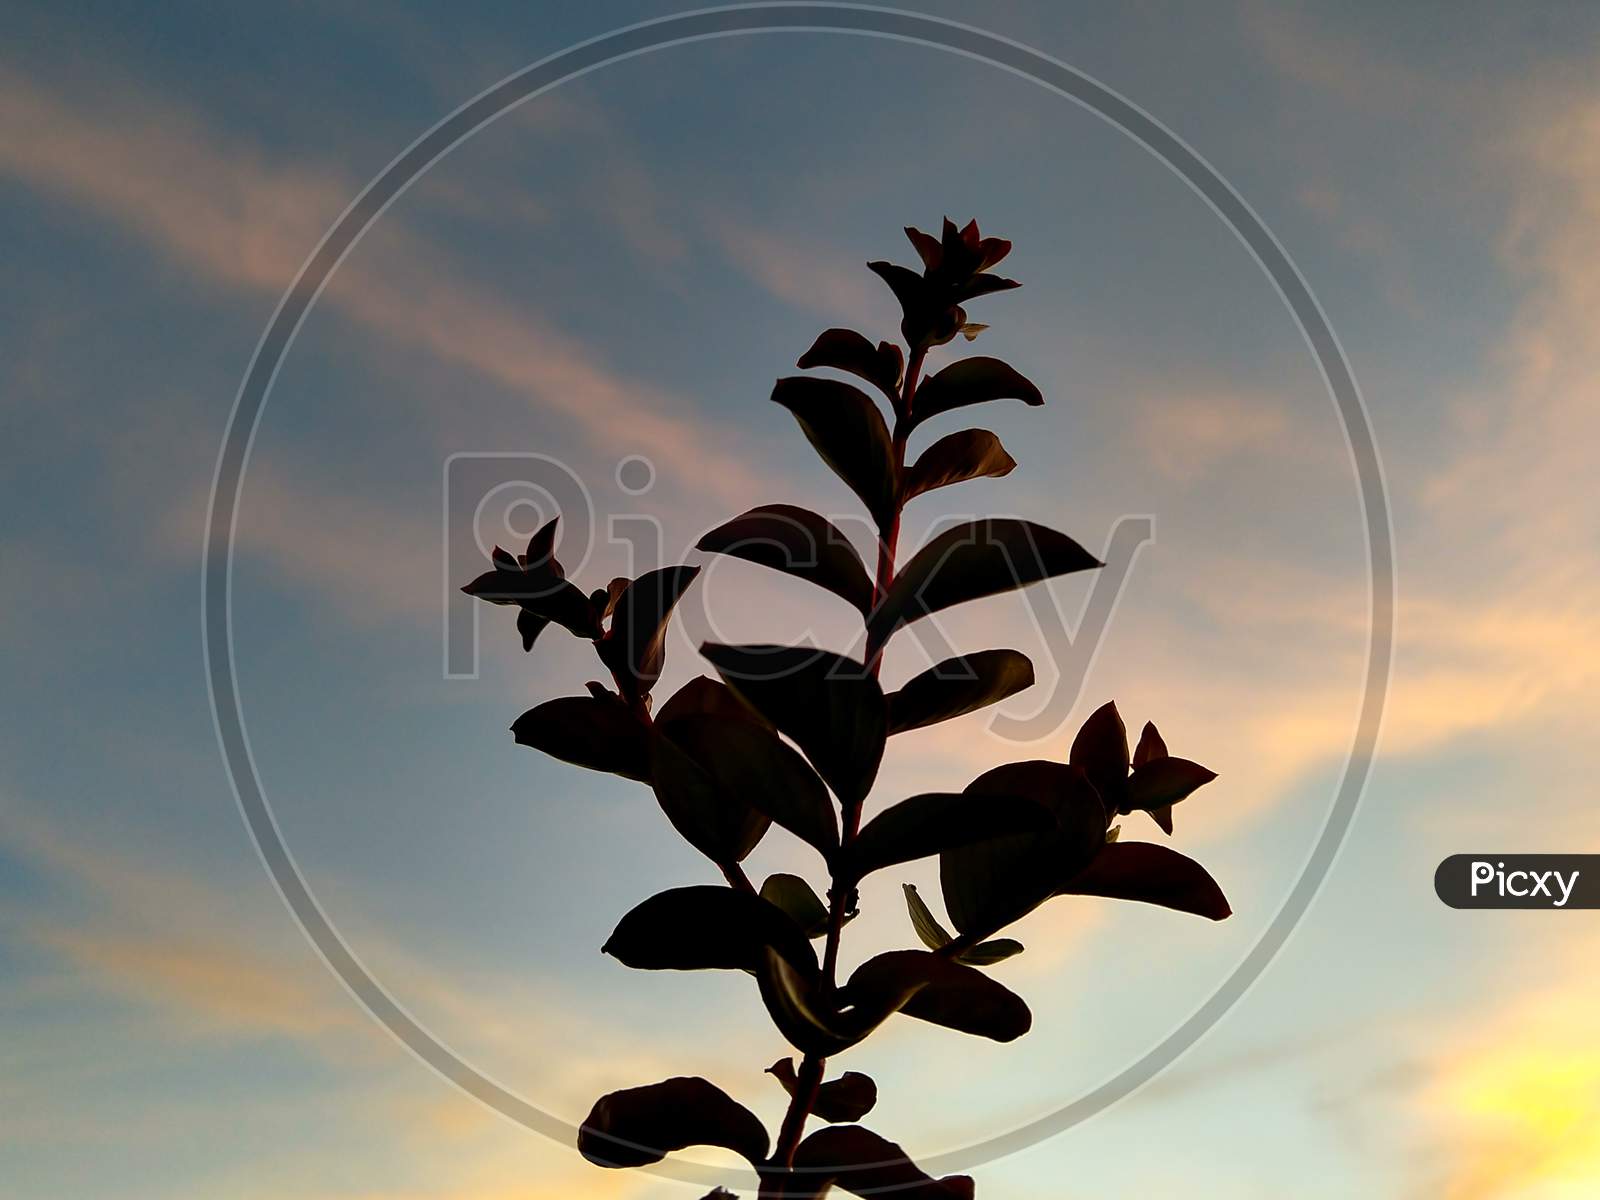 Lagerstroemia Indica Also Known As Crape Myrtle Tree Leaves Are Silhouetted Against The Sky